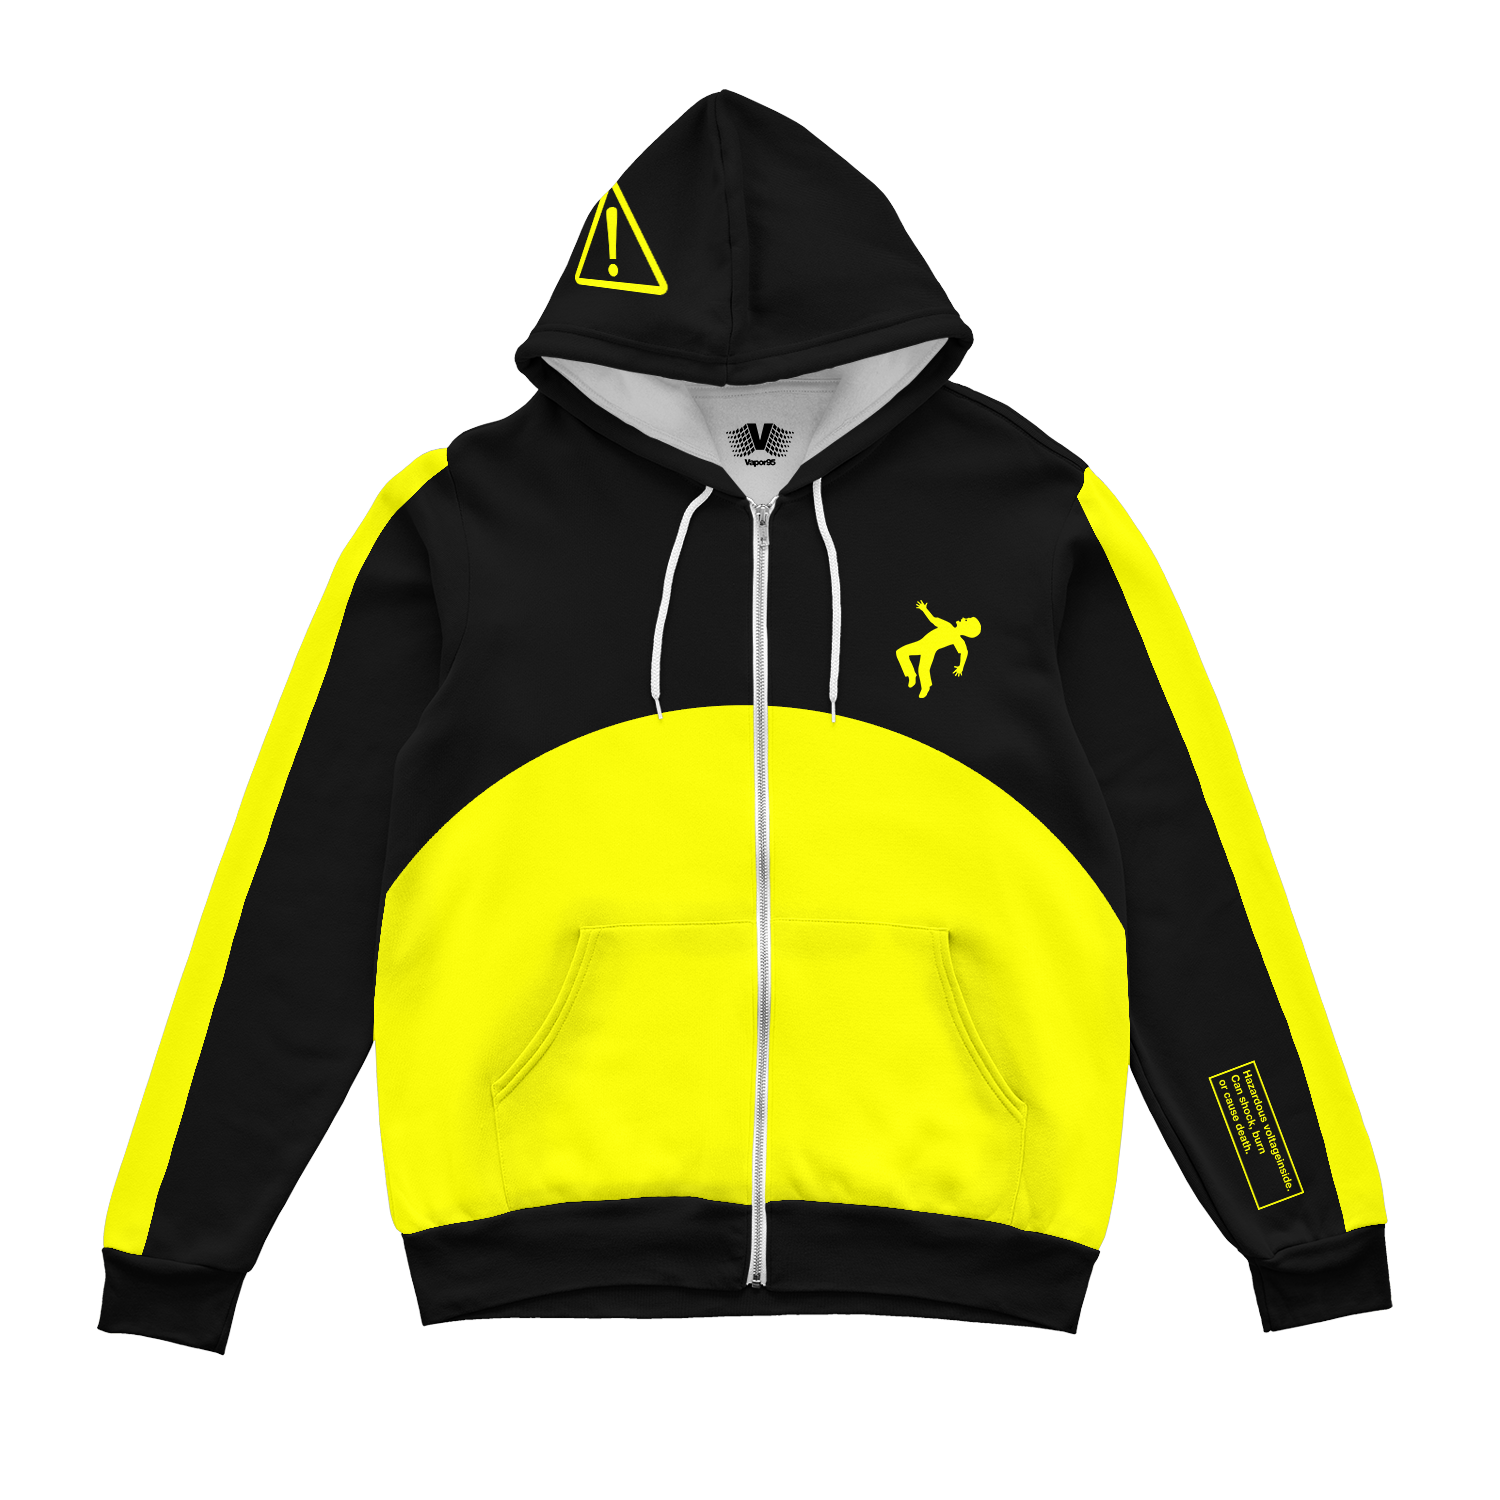 Mr. Ouch Zip Up Hoodie